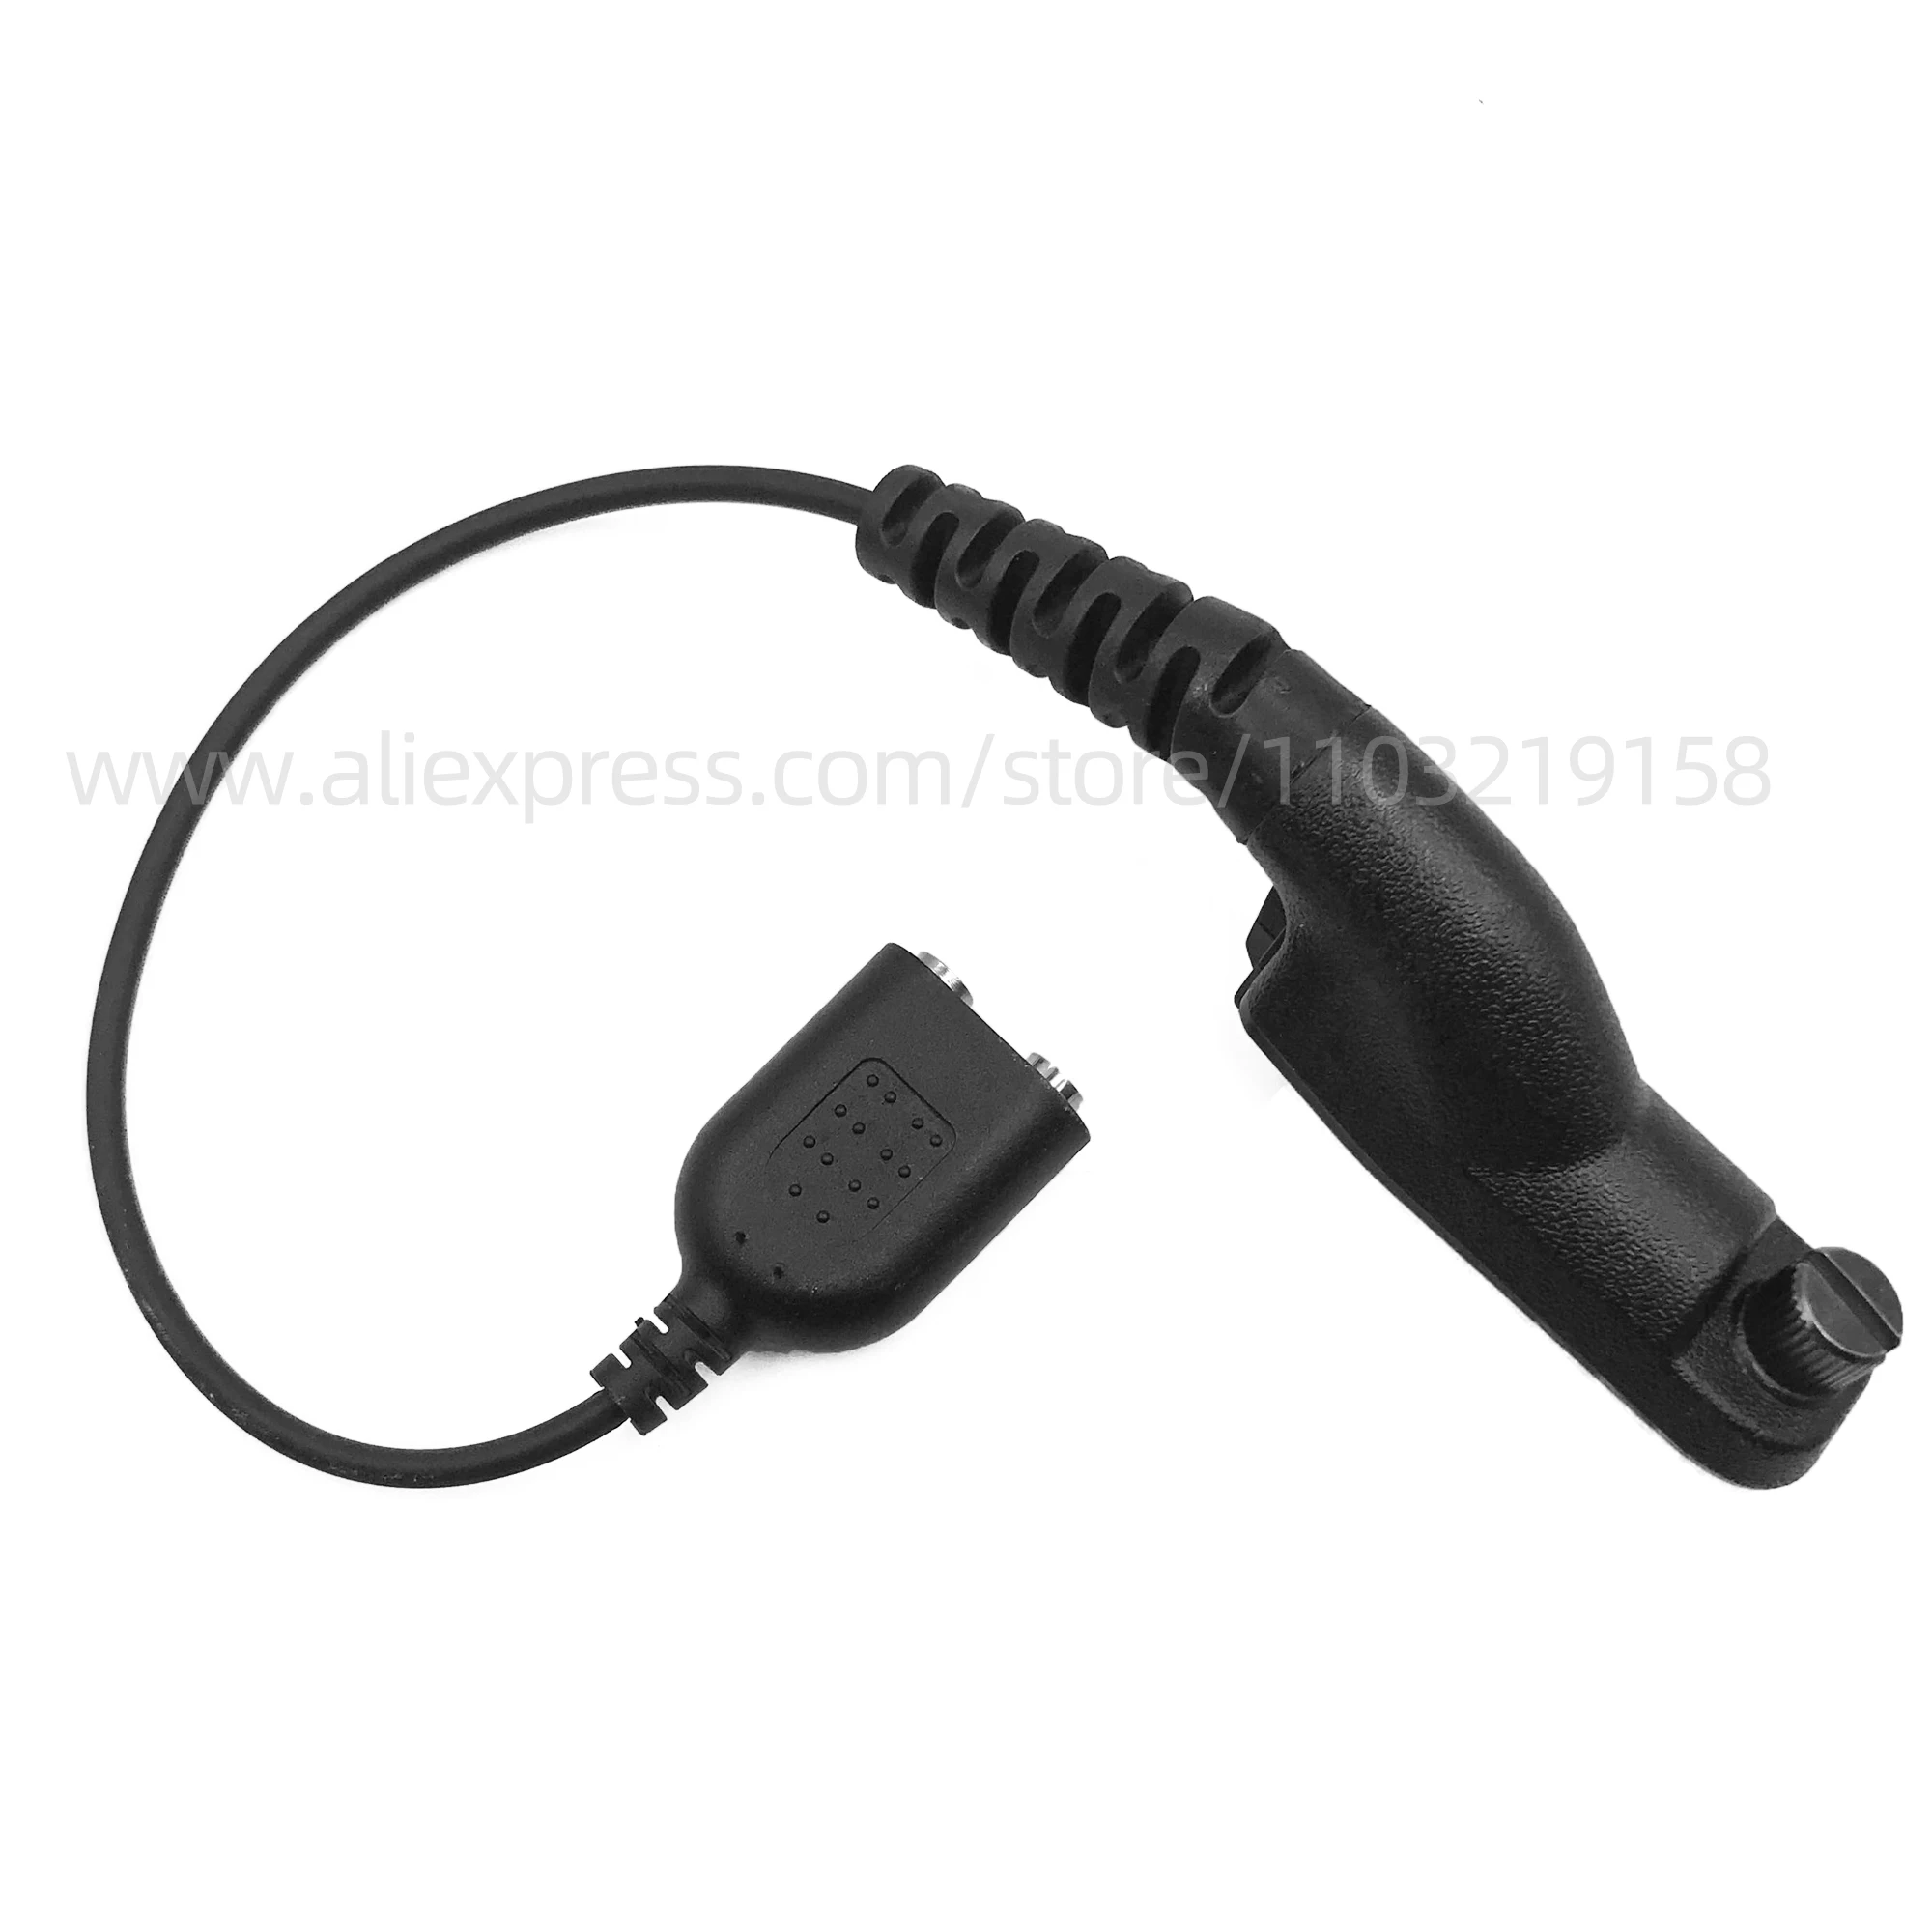 

Audio Adapter Connector For Motorola Xir P8268 P8668 APX6000 APX7000 Walkie Headphone Conversion Cable To K-type 2-pin Earphone